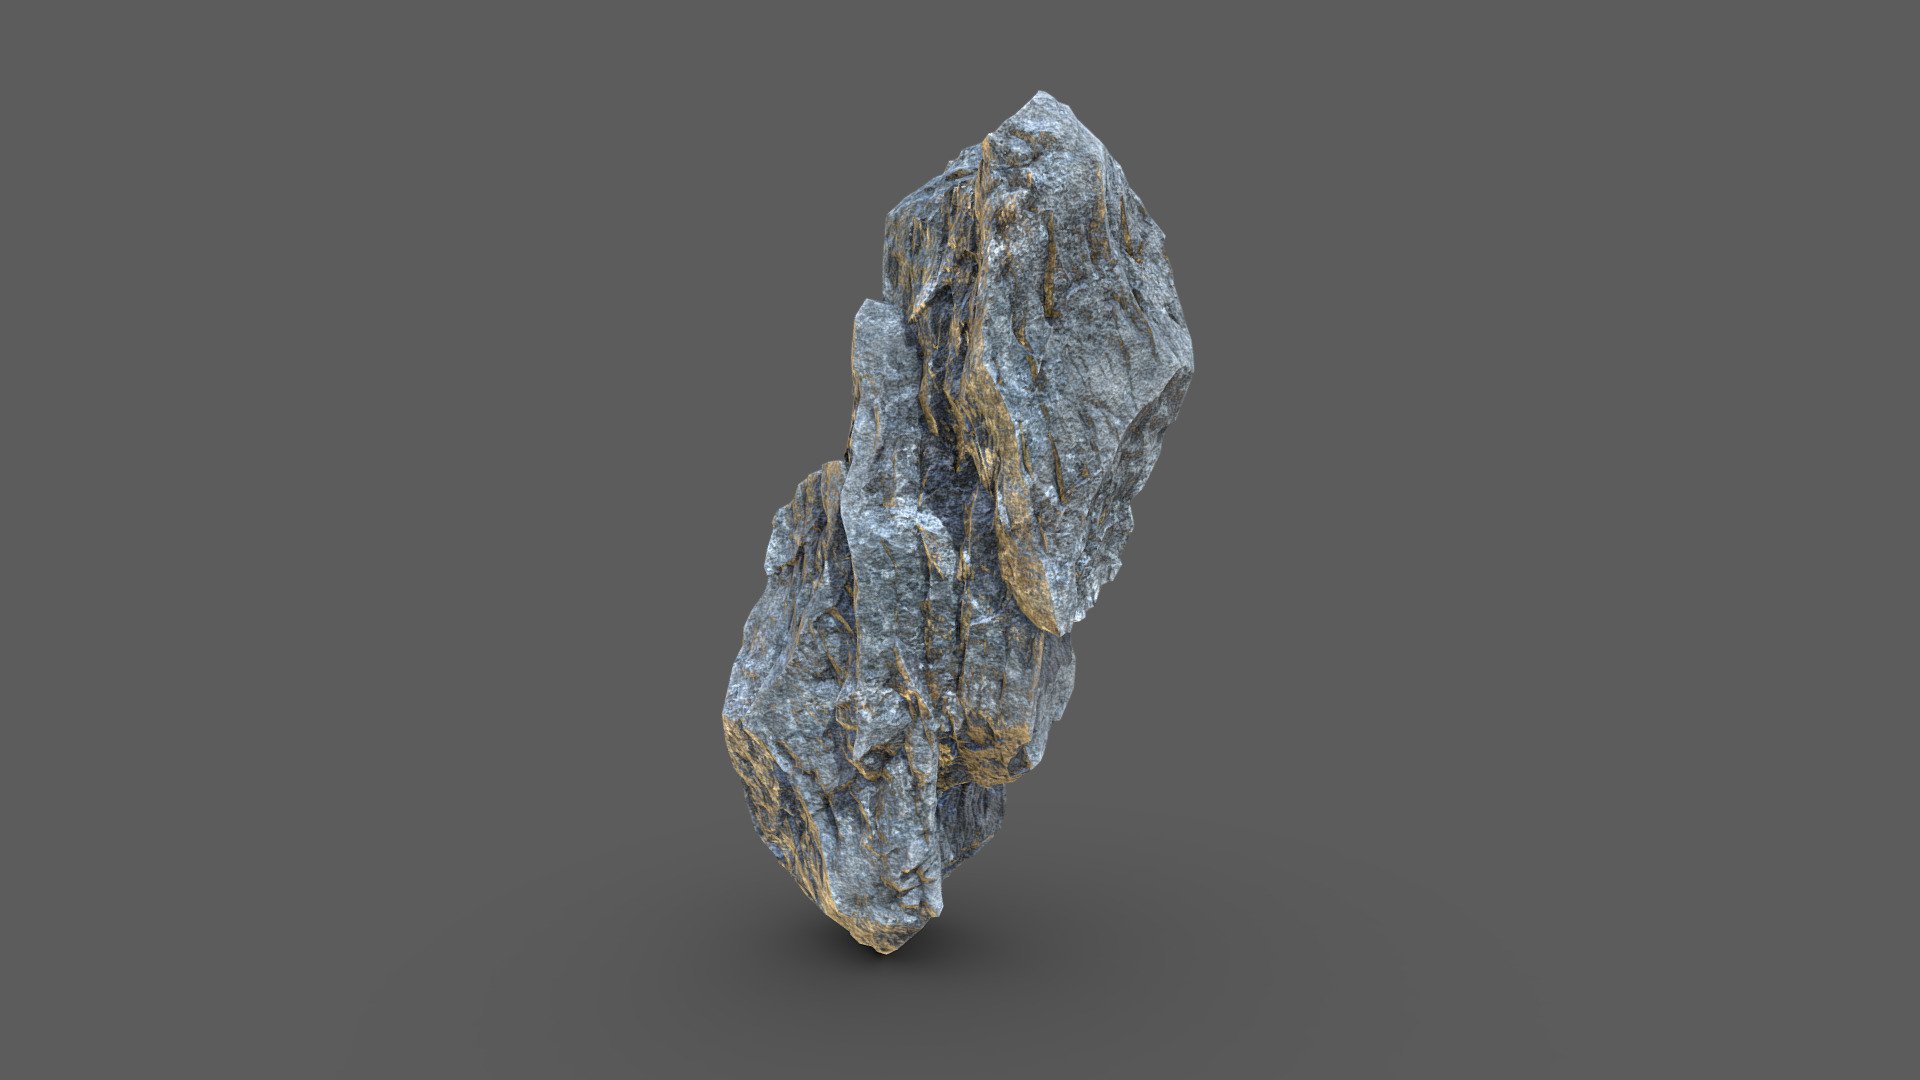 Rock 7_7 low poly

Topology: Tris

Polygon count: 6994

Vertices count: 3499

Textures: Diffuse, Normal, Specular, Glossiness, Curvature, Height, Ambient Occlusion ( all in 4k resolution)

UV mapped with non-overlapping

All files are zipped in one folder. Contains 3 file formats obj, ma &amp; fbx

Useful for games, renders, background scenes and other graphical projects 3d model